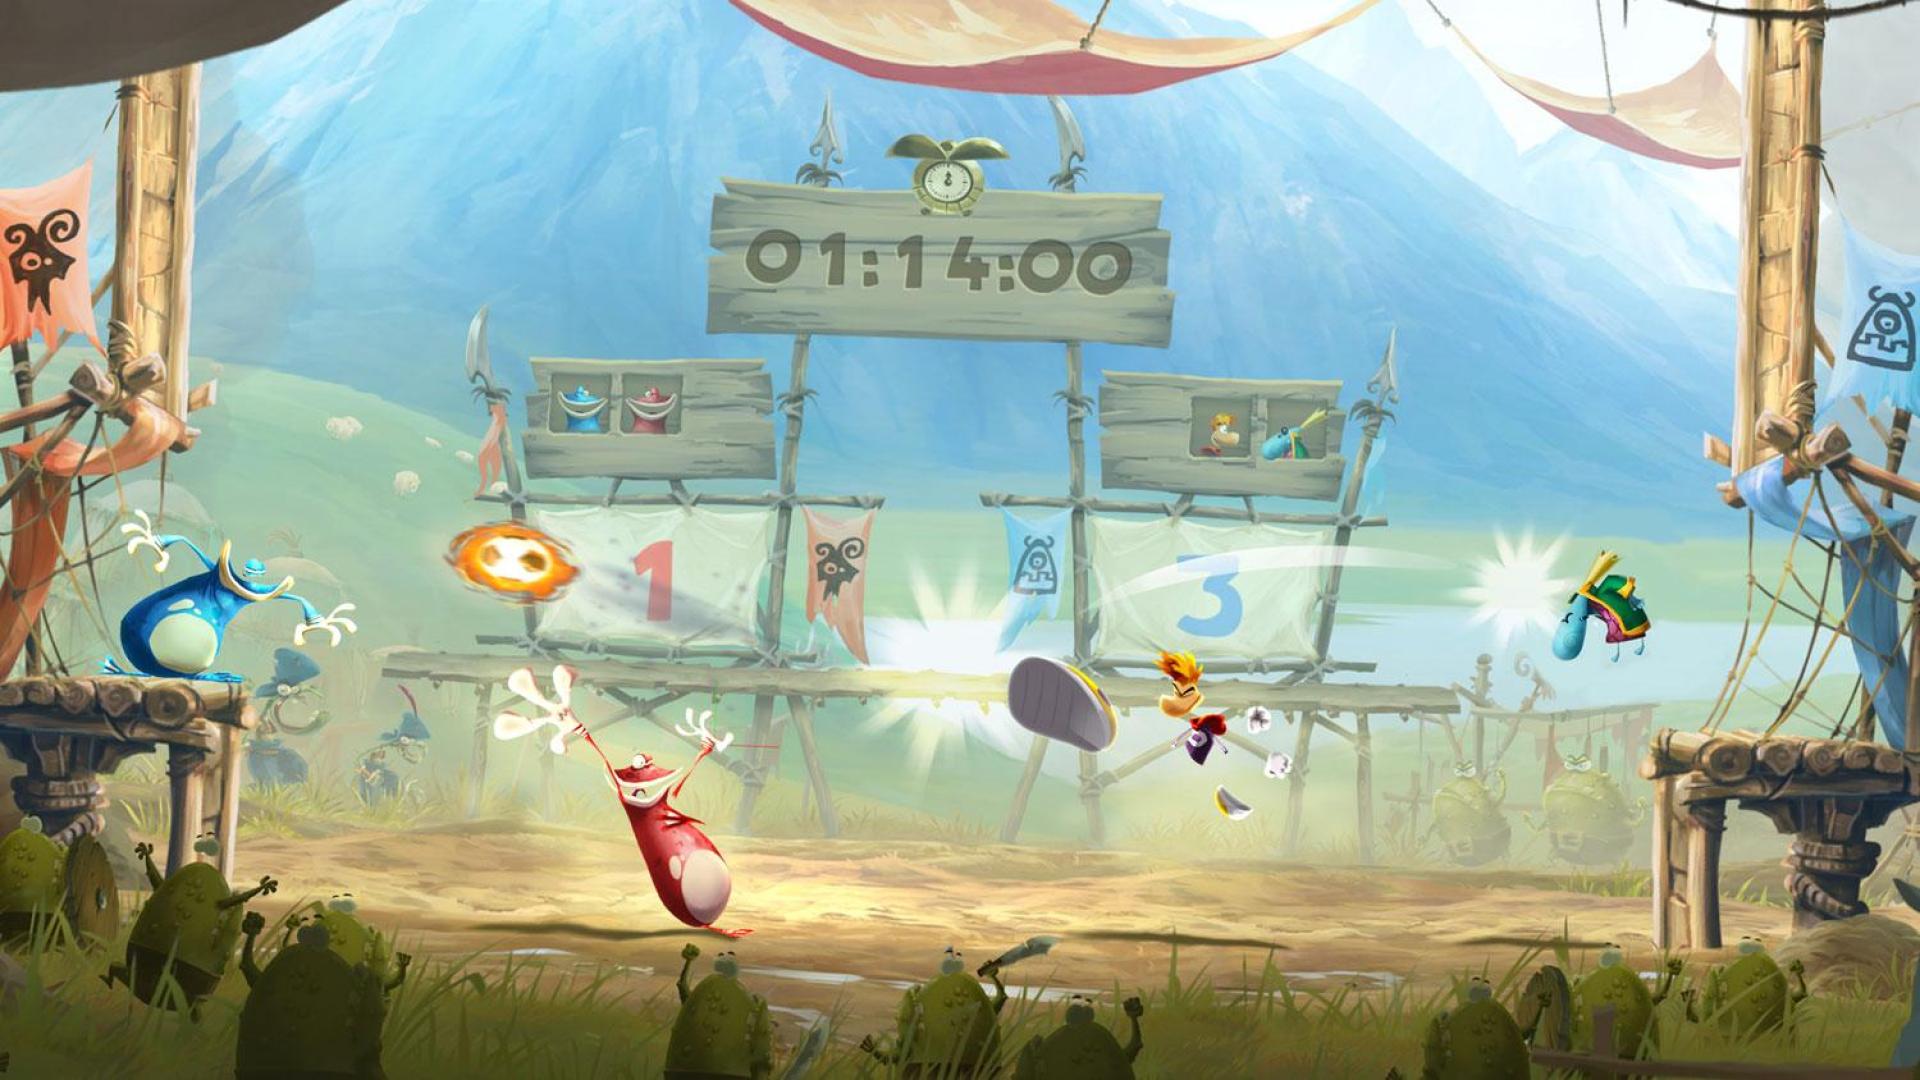 Rayman Legends Reviews, Pros and Cons